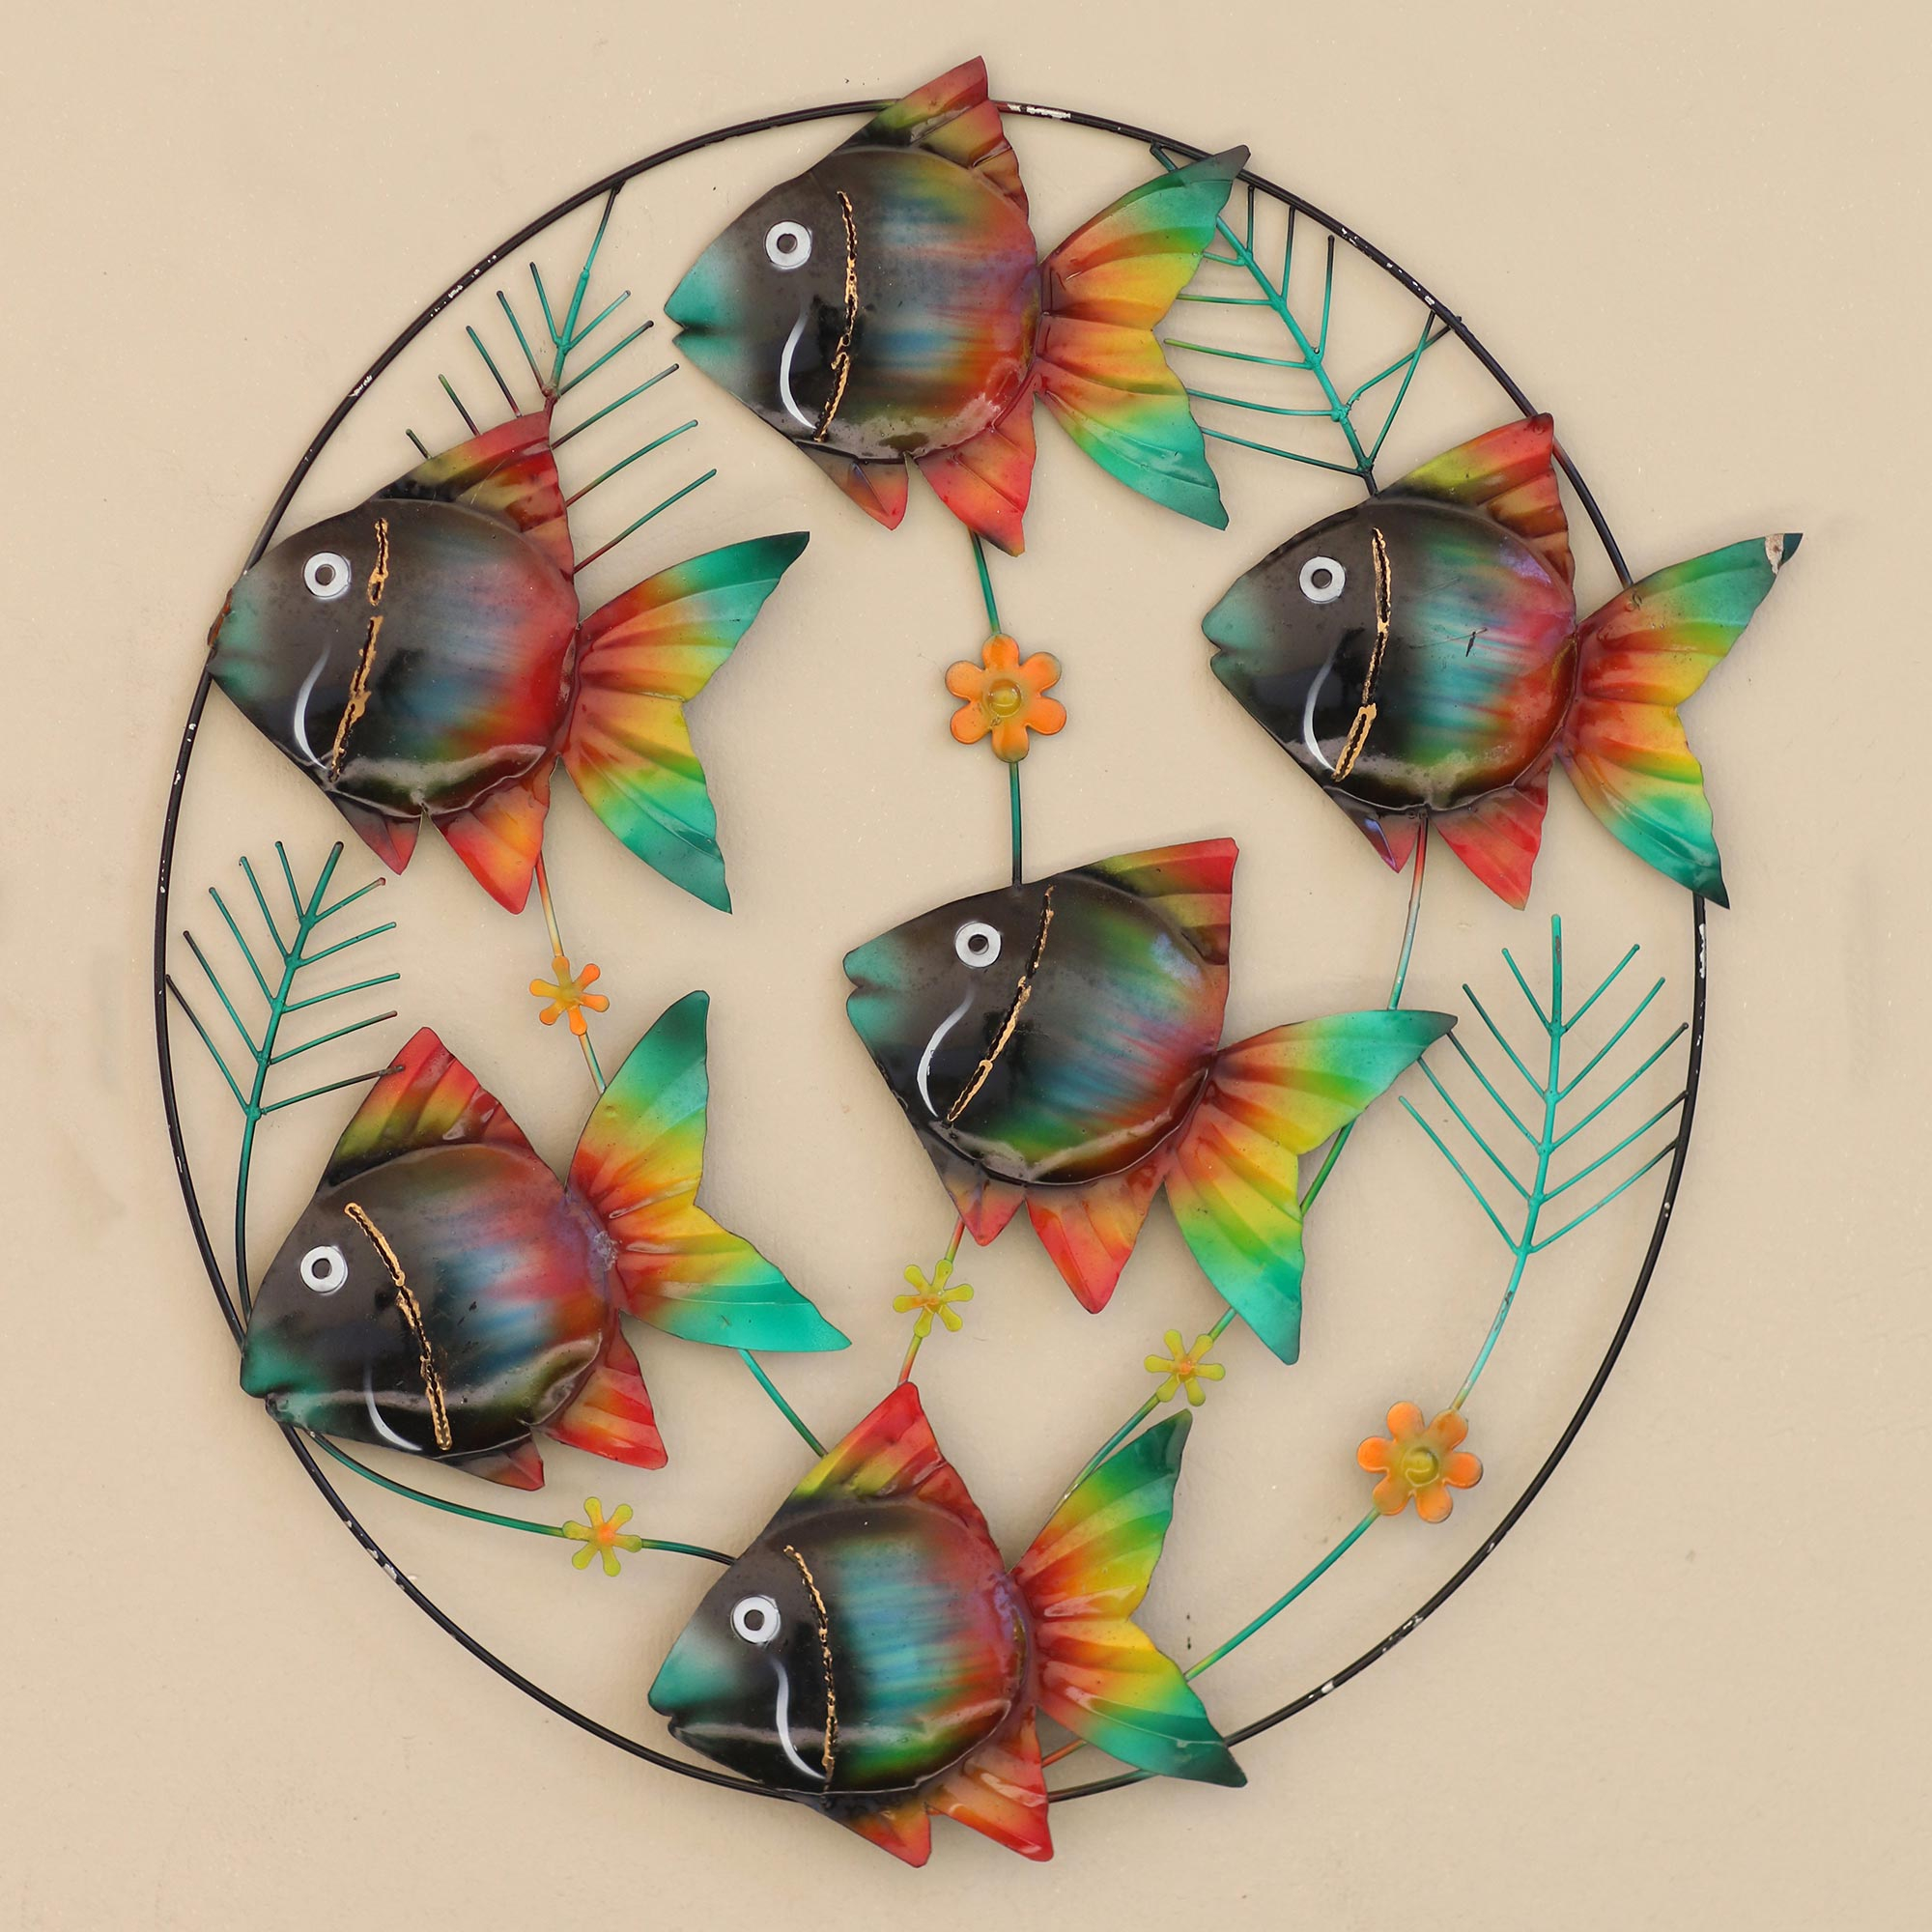 Hand Crafted Metal Wall Sculpture of Tropical Fish - Rainbow